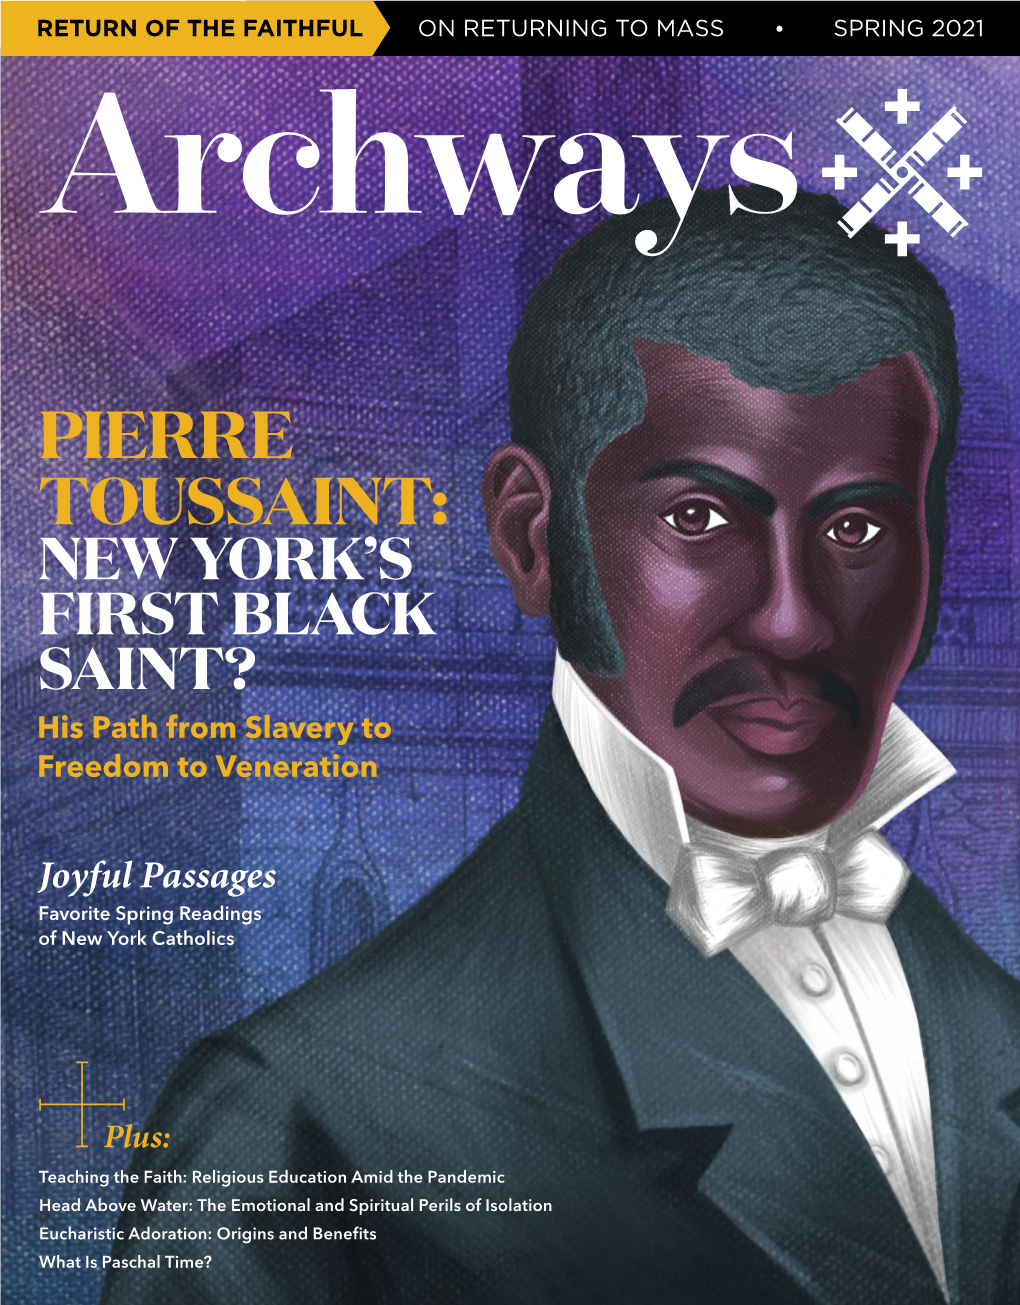 PIERRE TOUSSAINT: NEW YORK’S FIRST BLACK SAINT? His Path from Slavery to Freedom to Veneration